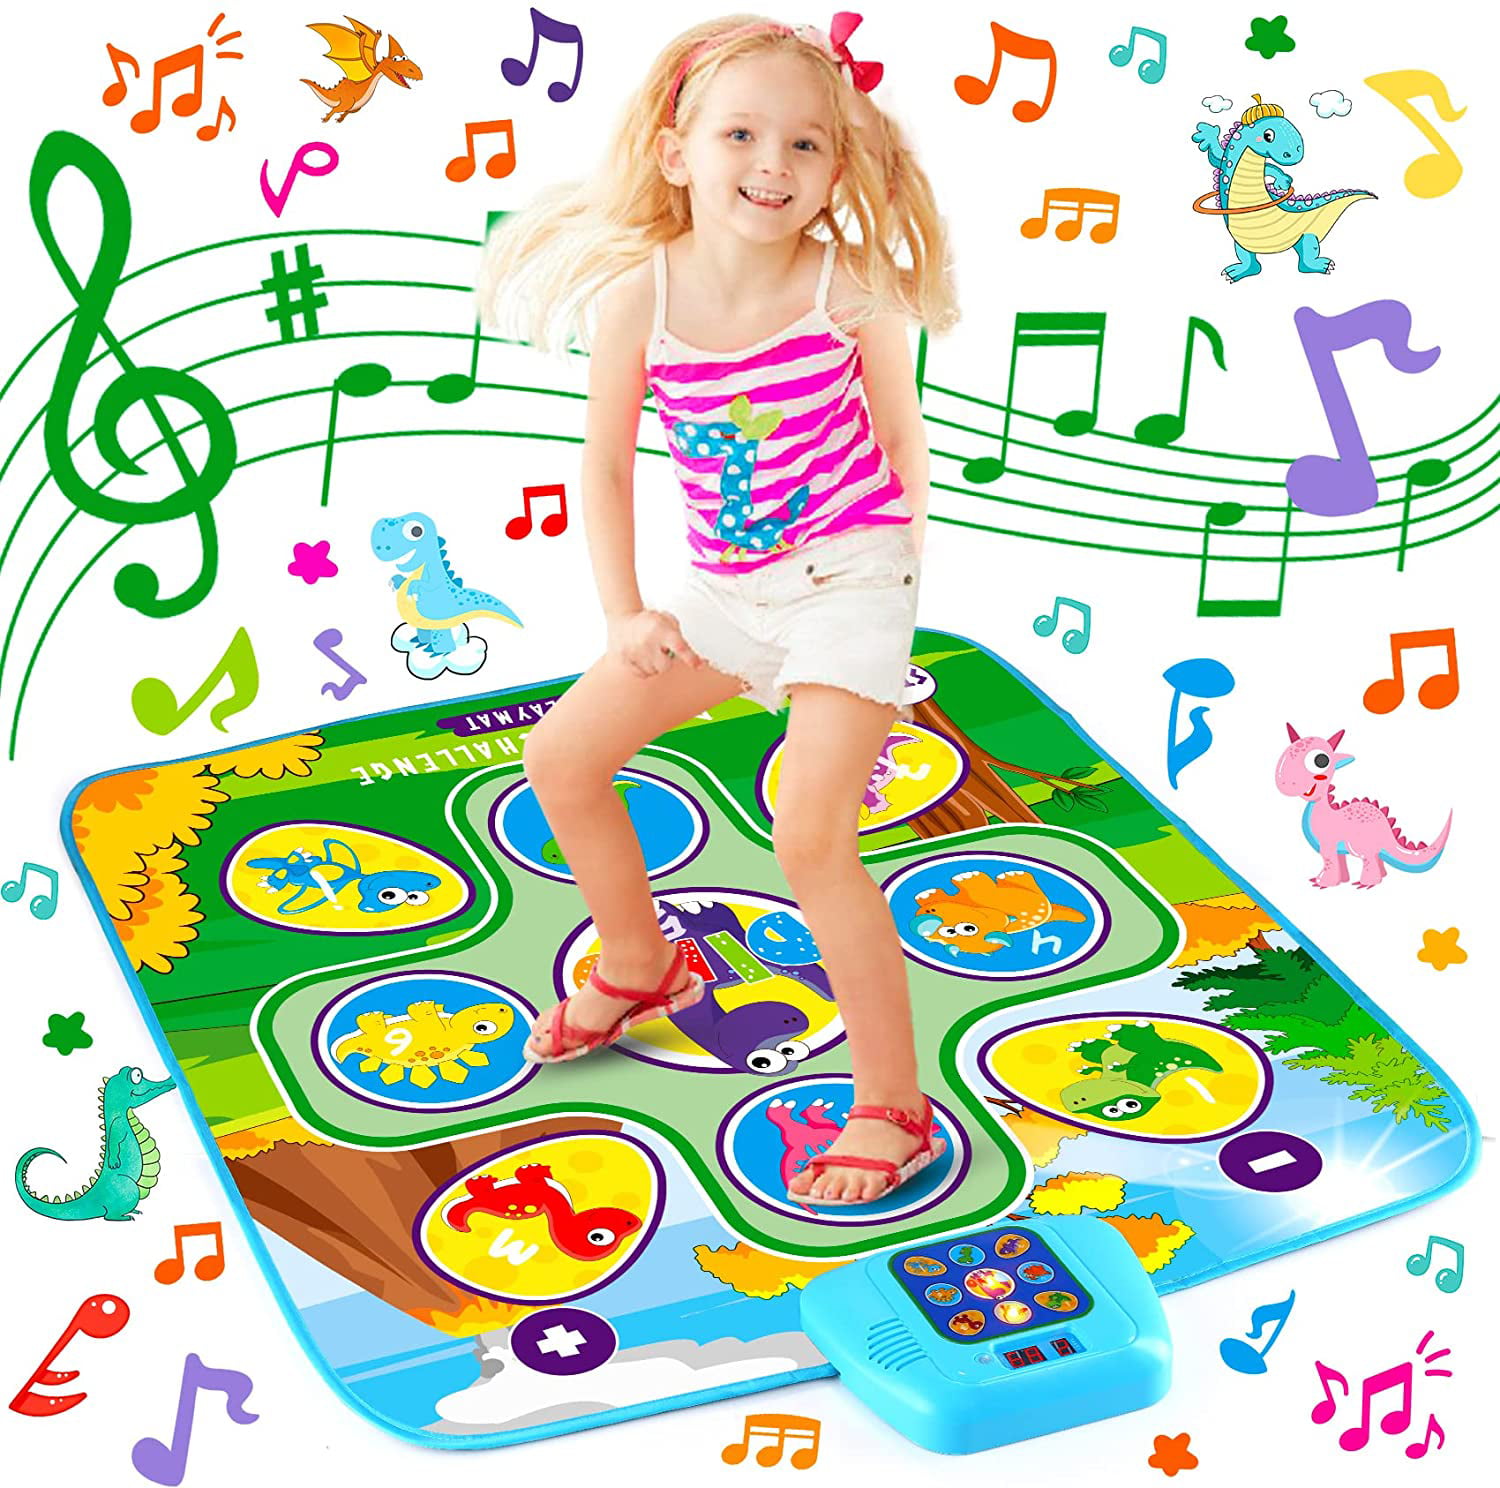 Adjustable Volume Built-in Music 3 Challenge Levels Electronic Dance Mats Game Toy Gift for Kids Boys Girls Dance Mat Dance Pad with LED Lights Musical Mat Dance Mixer Step Play Mat 